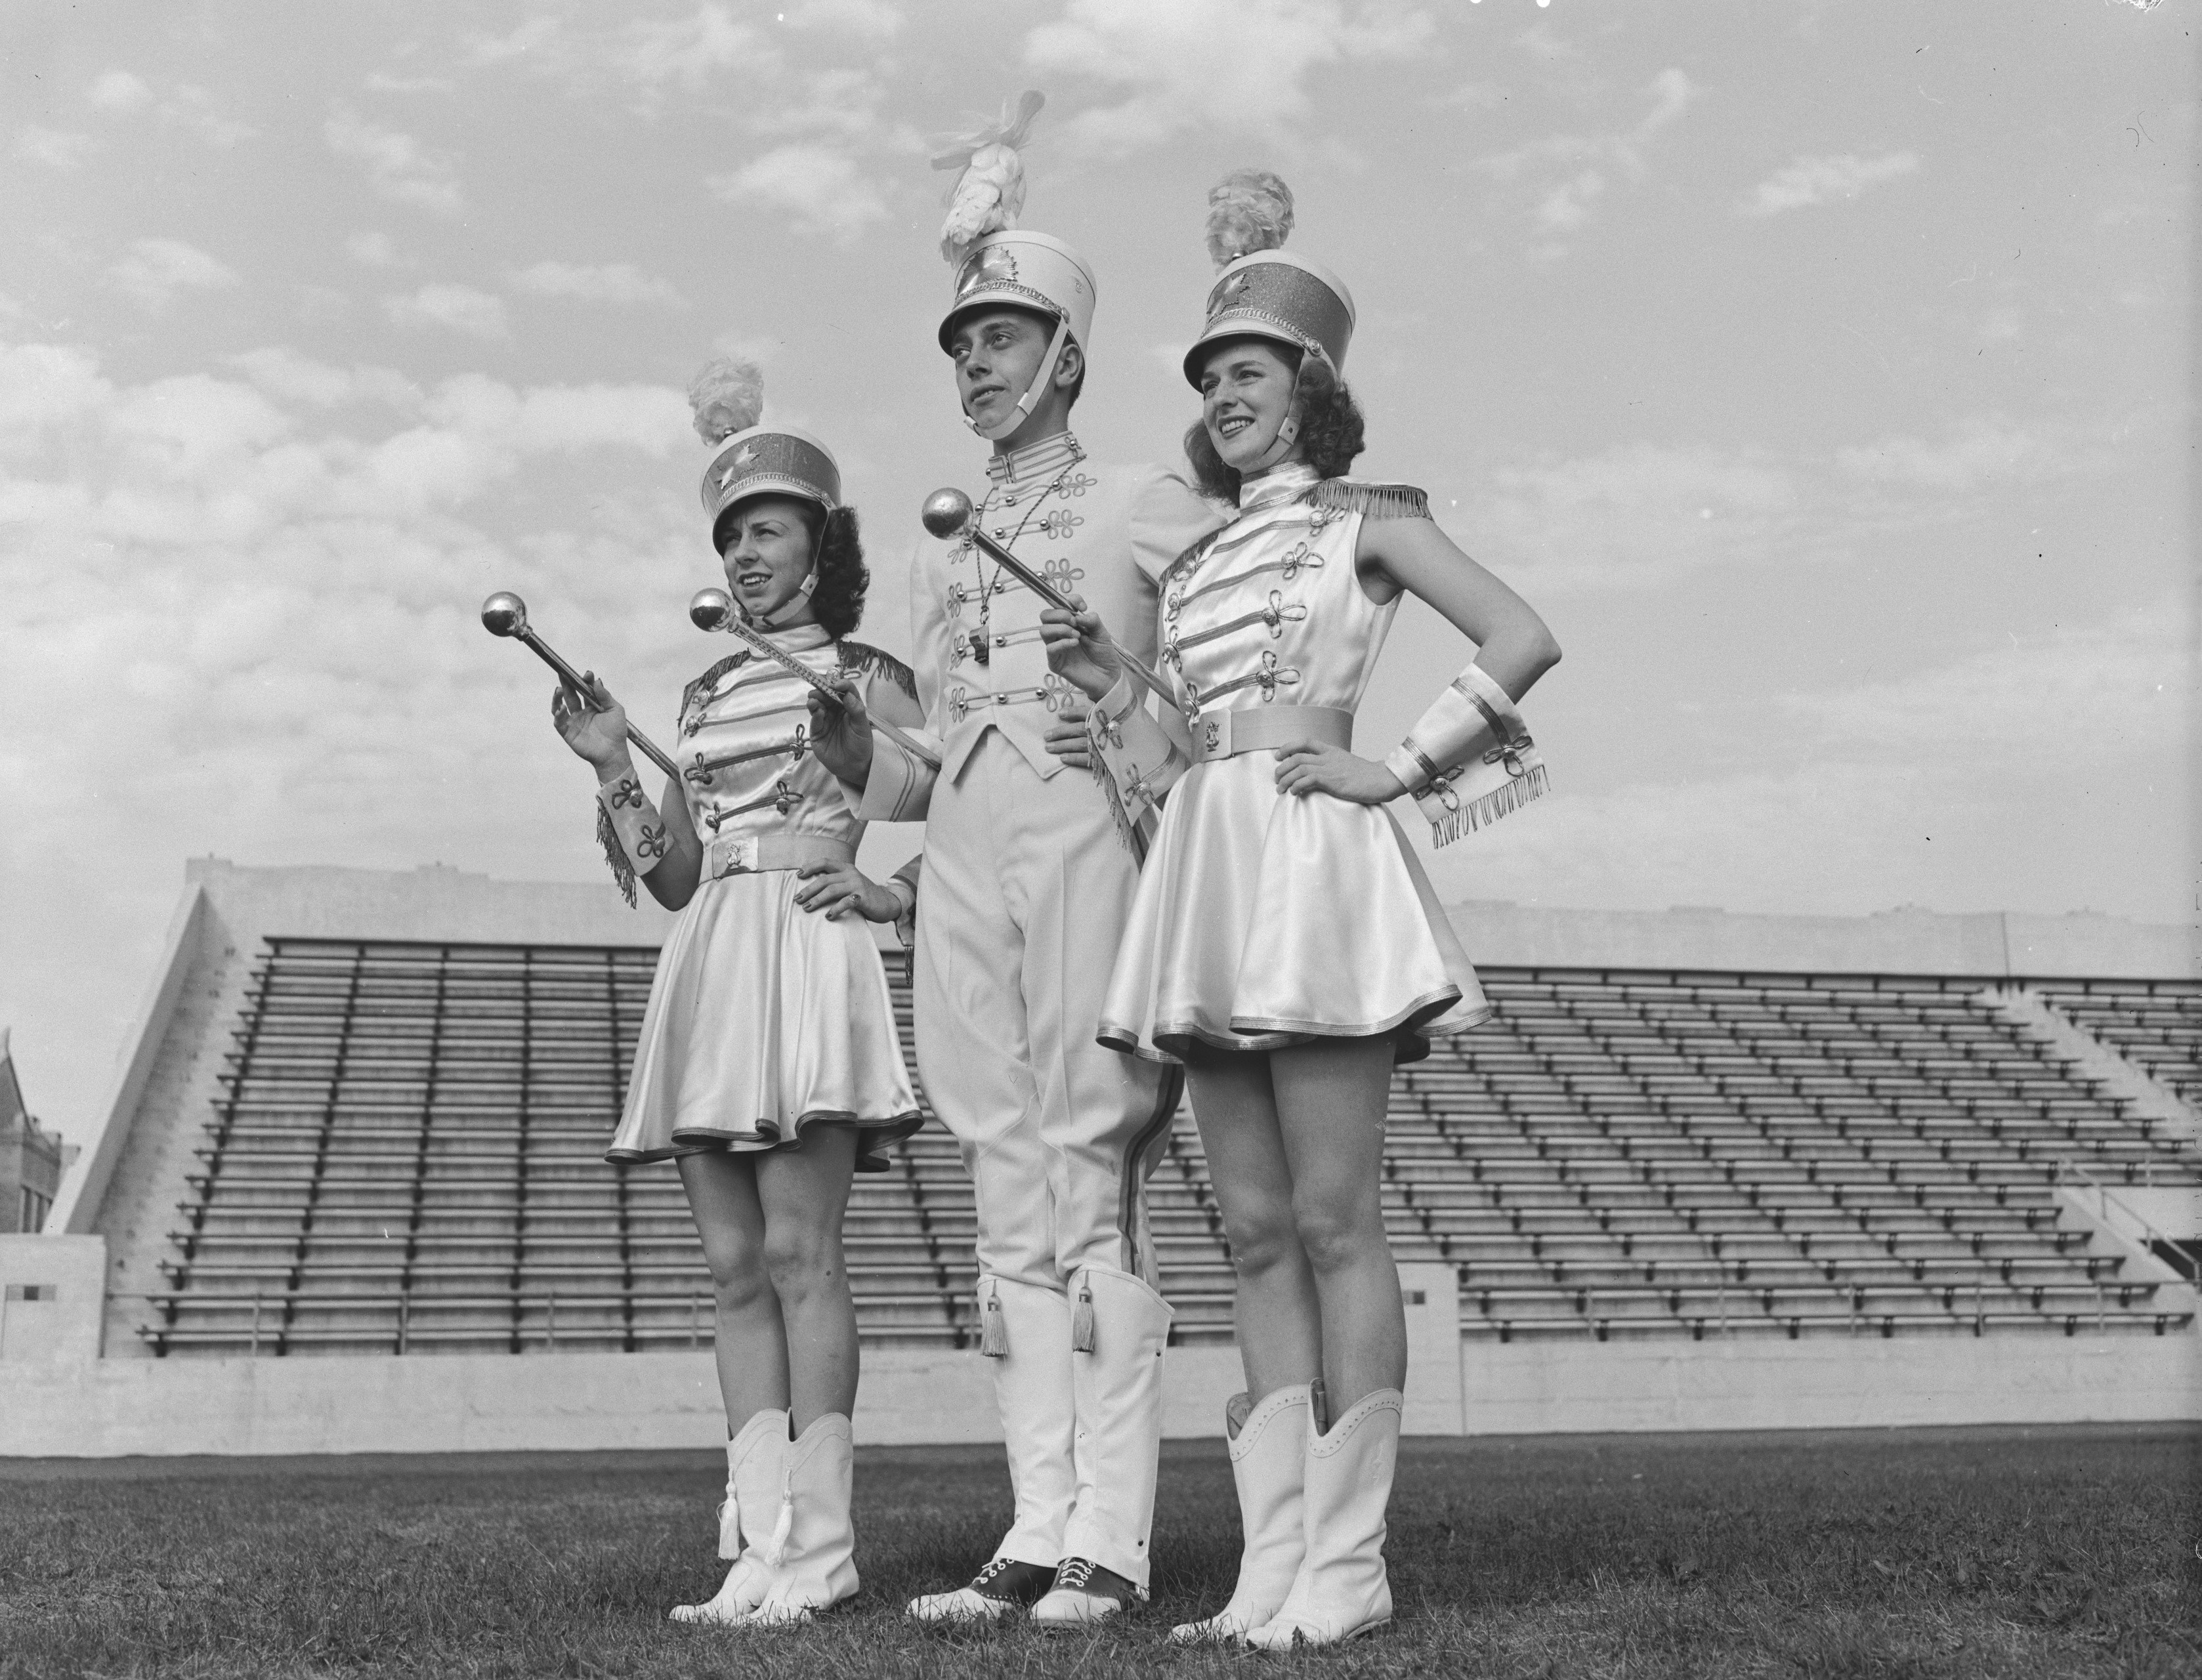 Historic photo shows three drum majors for the Bowling Green marching band